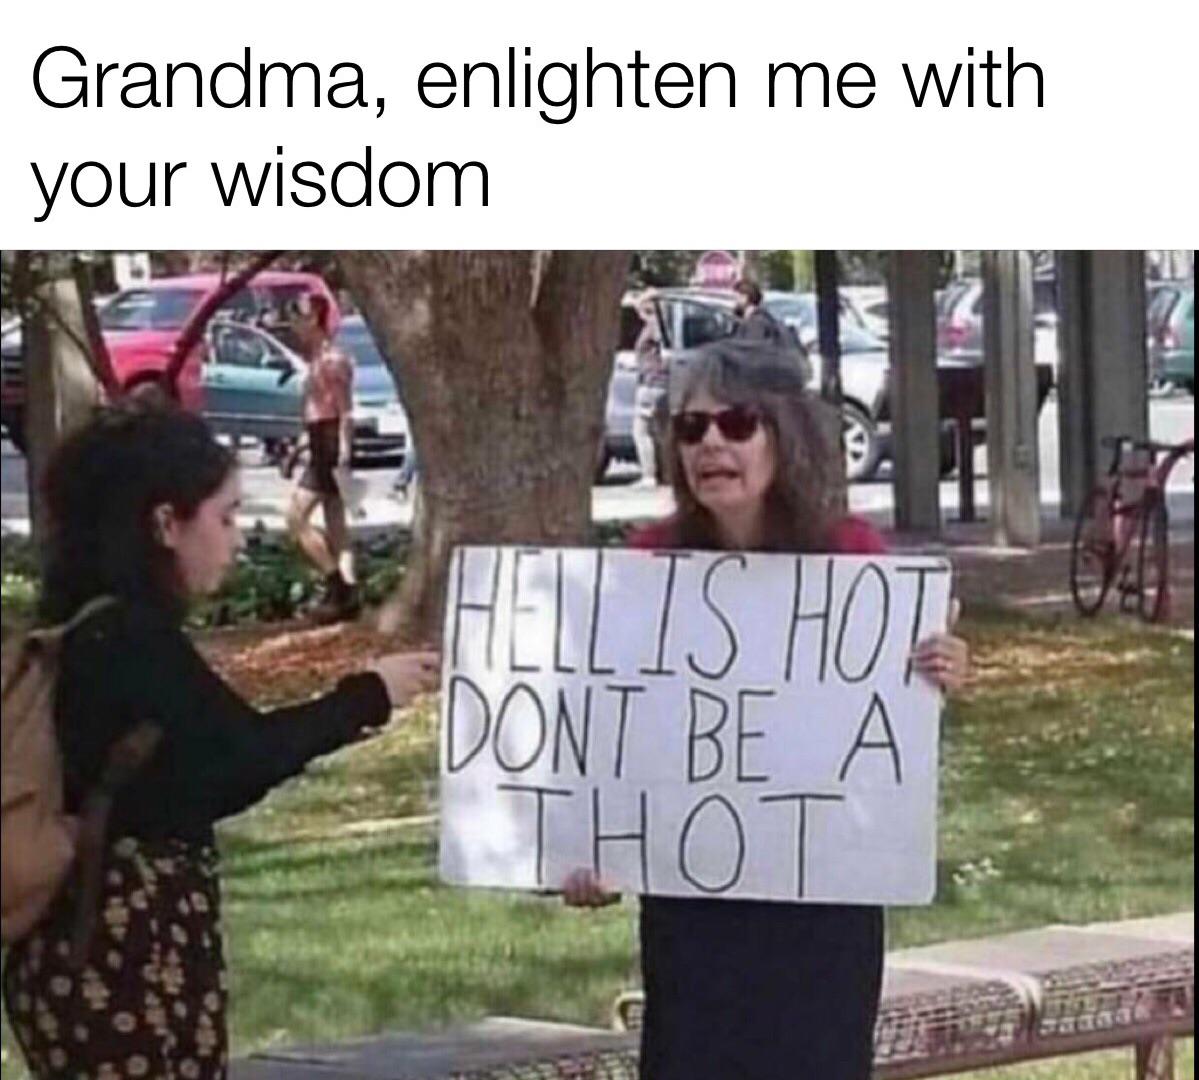 Grans are a source of wisdom, generally.